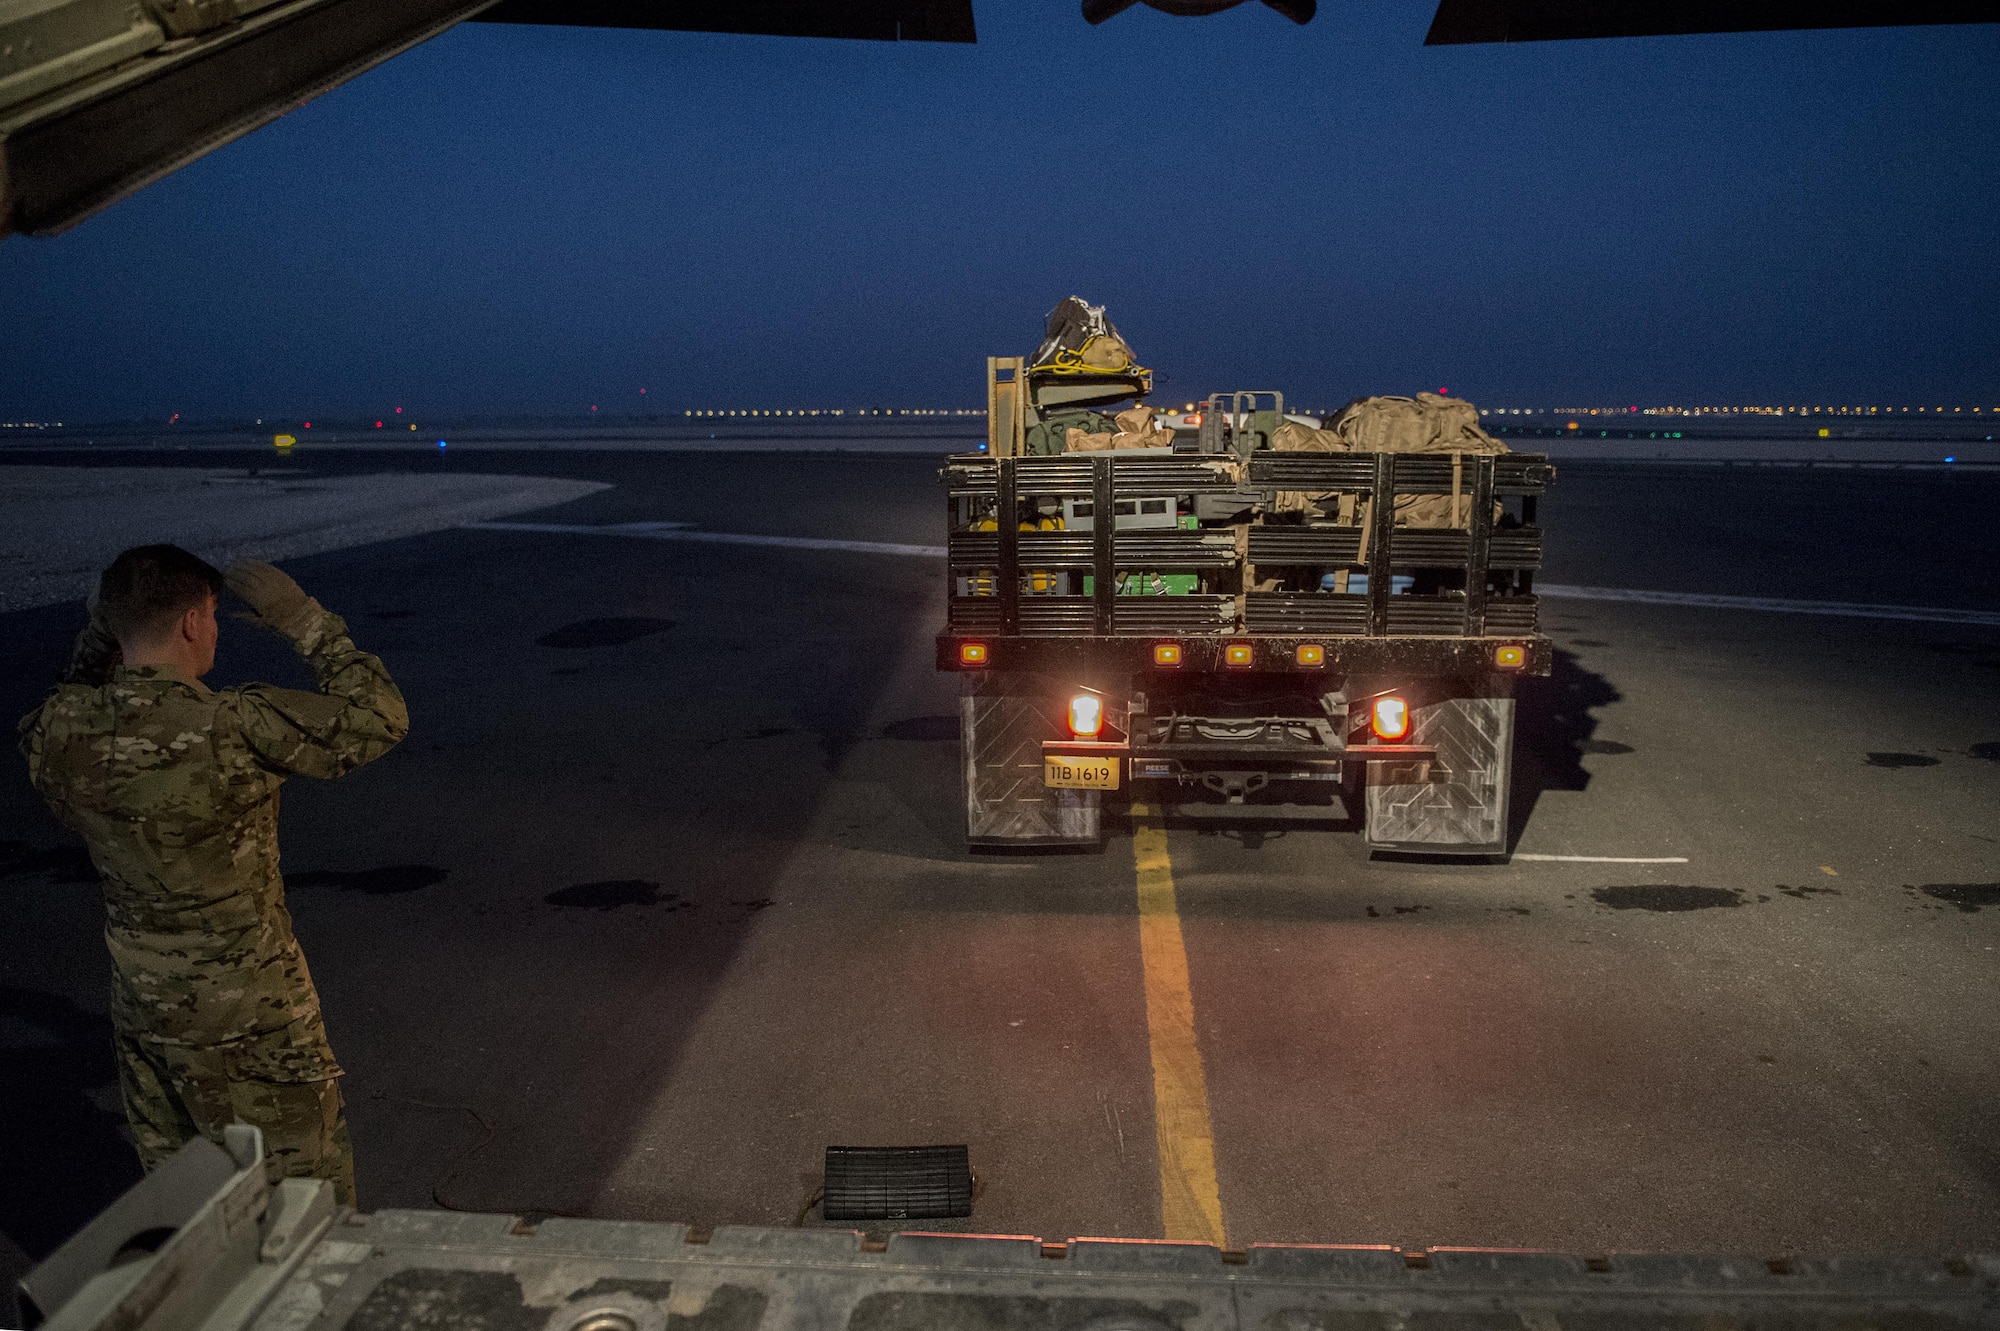 U.S. Air Force Tech. Sgt. Zeb Petterborg, 379th Expeditionary Aeromedical Evacuation Squadron medical technician, marshals a truck of medical equipment to the back of a C-130H Hercules at Al Udeid Air Base, Qatar in support of Operation Inherent Resolve, Jan. 6, 2016. OIR is the coalition intervention against the Islamic State of Iraq and the Levant. (U.S. Air Force photo by Tech. Sgt. Nathan Lipscomb)